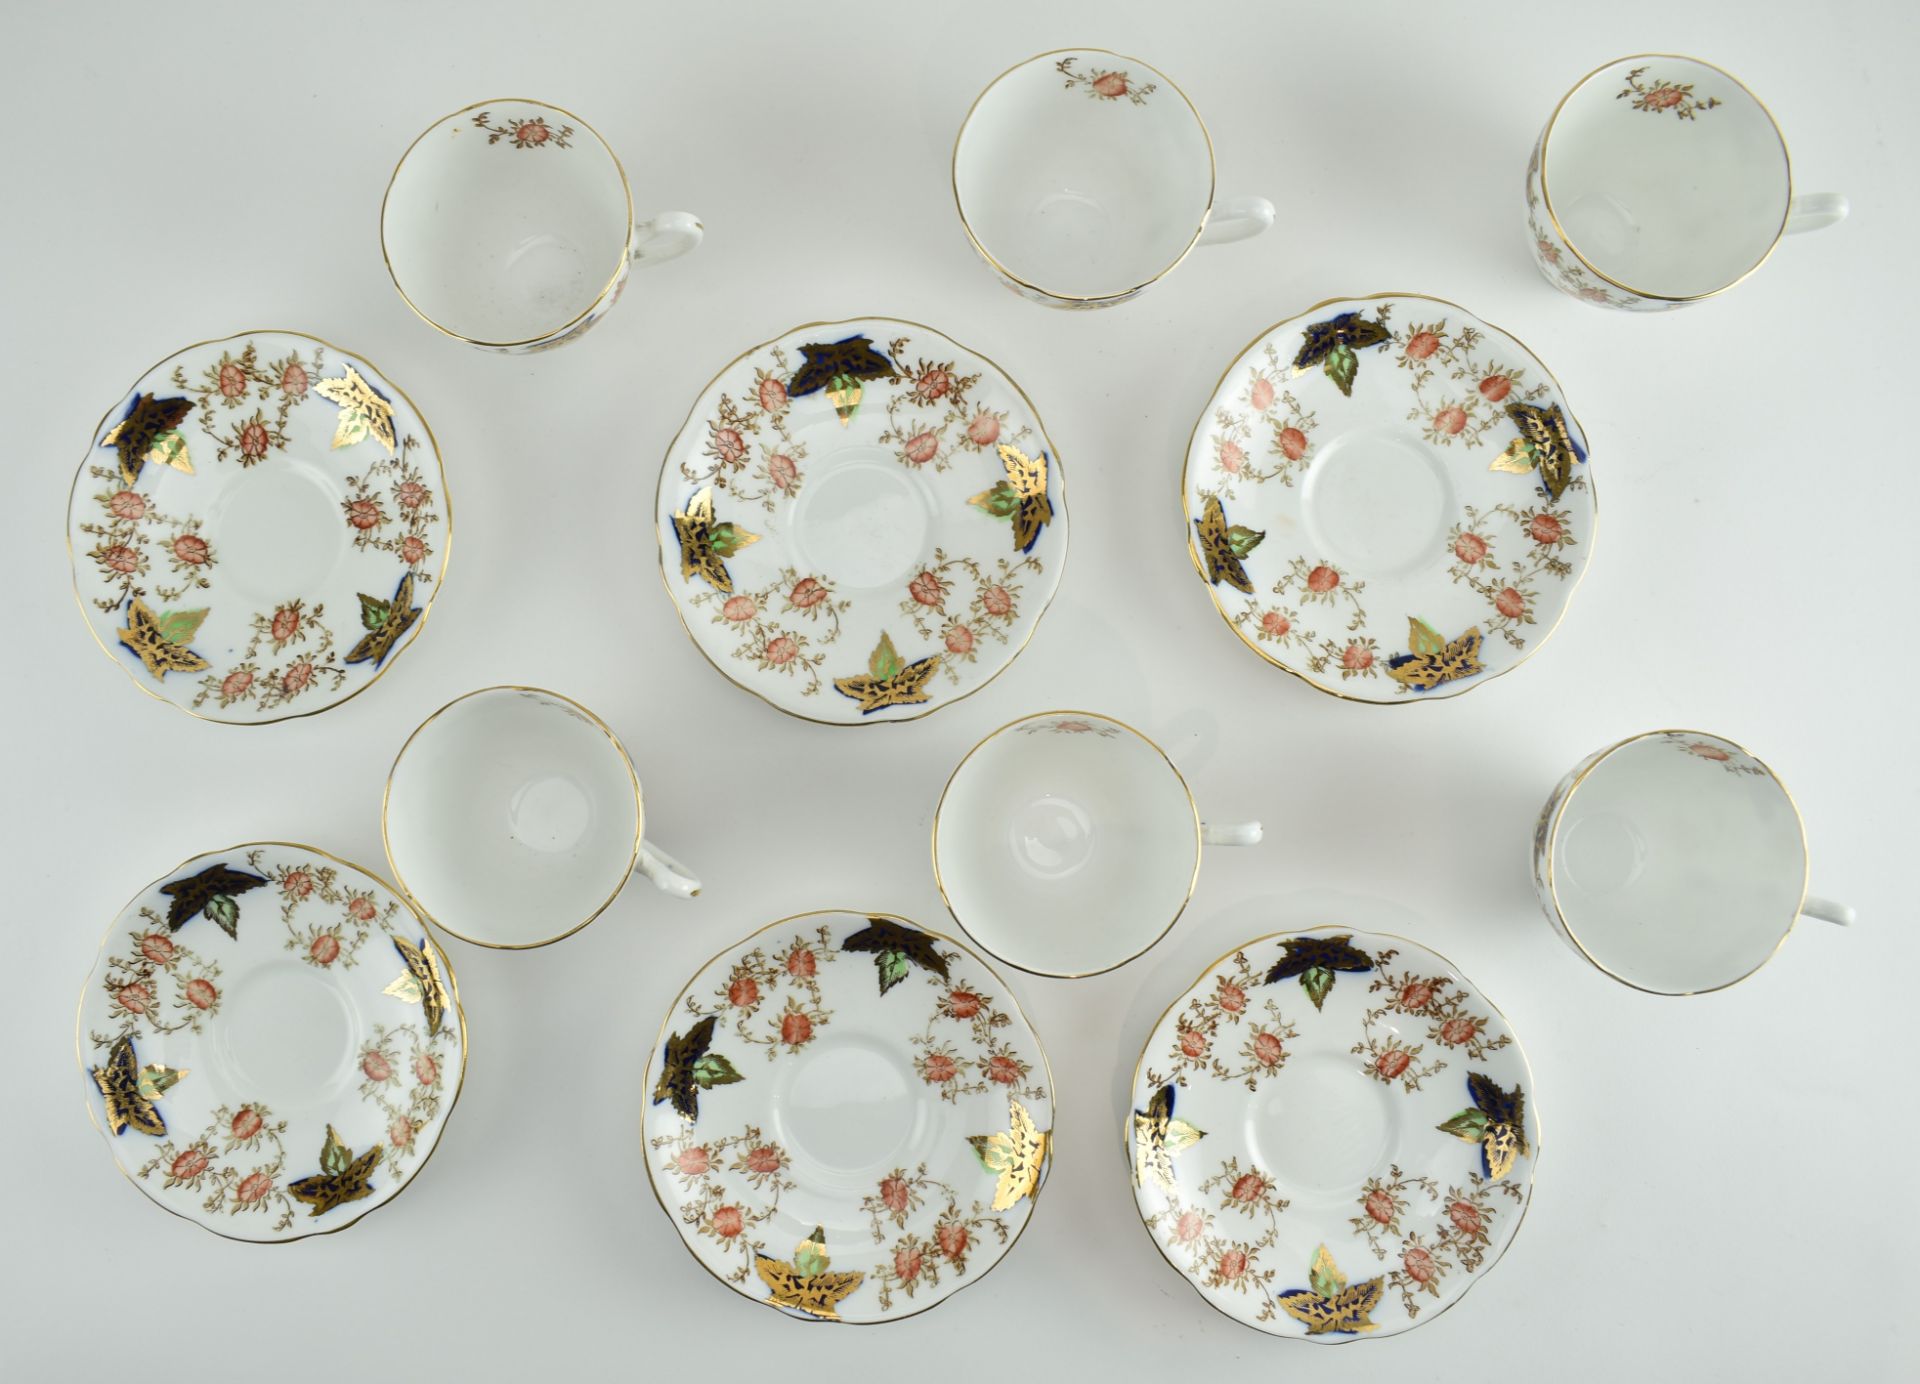 SIX VINTAGE ENGLISH BONE CHINA CUPS AND SAUCERS SETS AND A JUG - Image 3 of 10